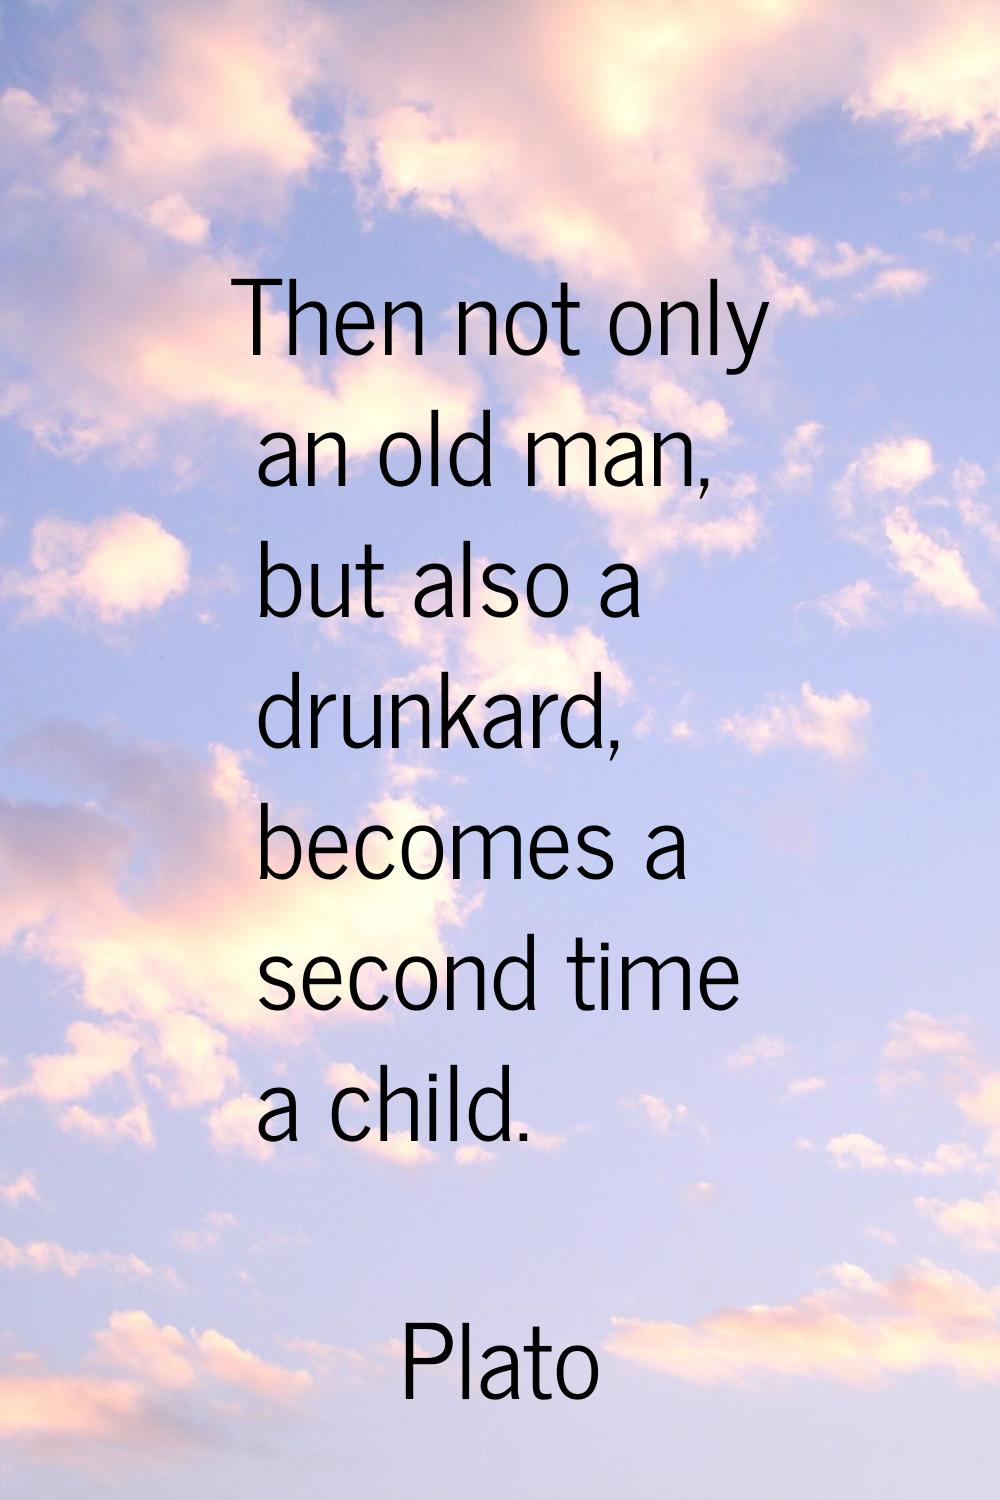 Then not only an old man, but also a drunkard, becomes a second time a child.